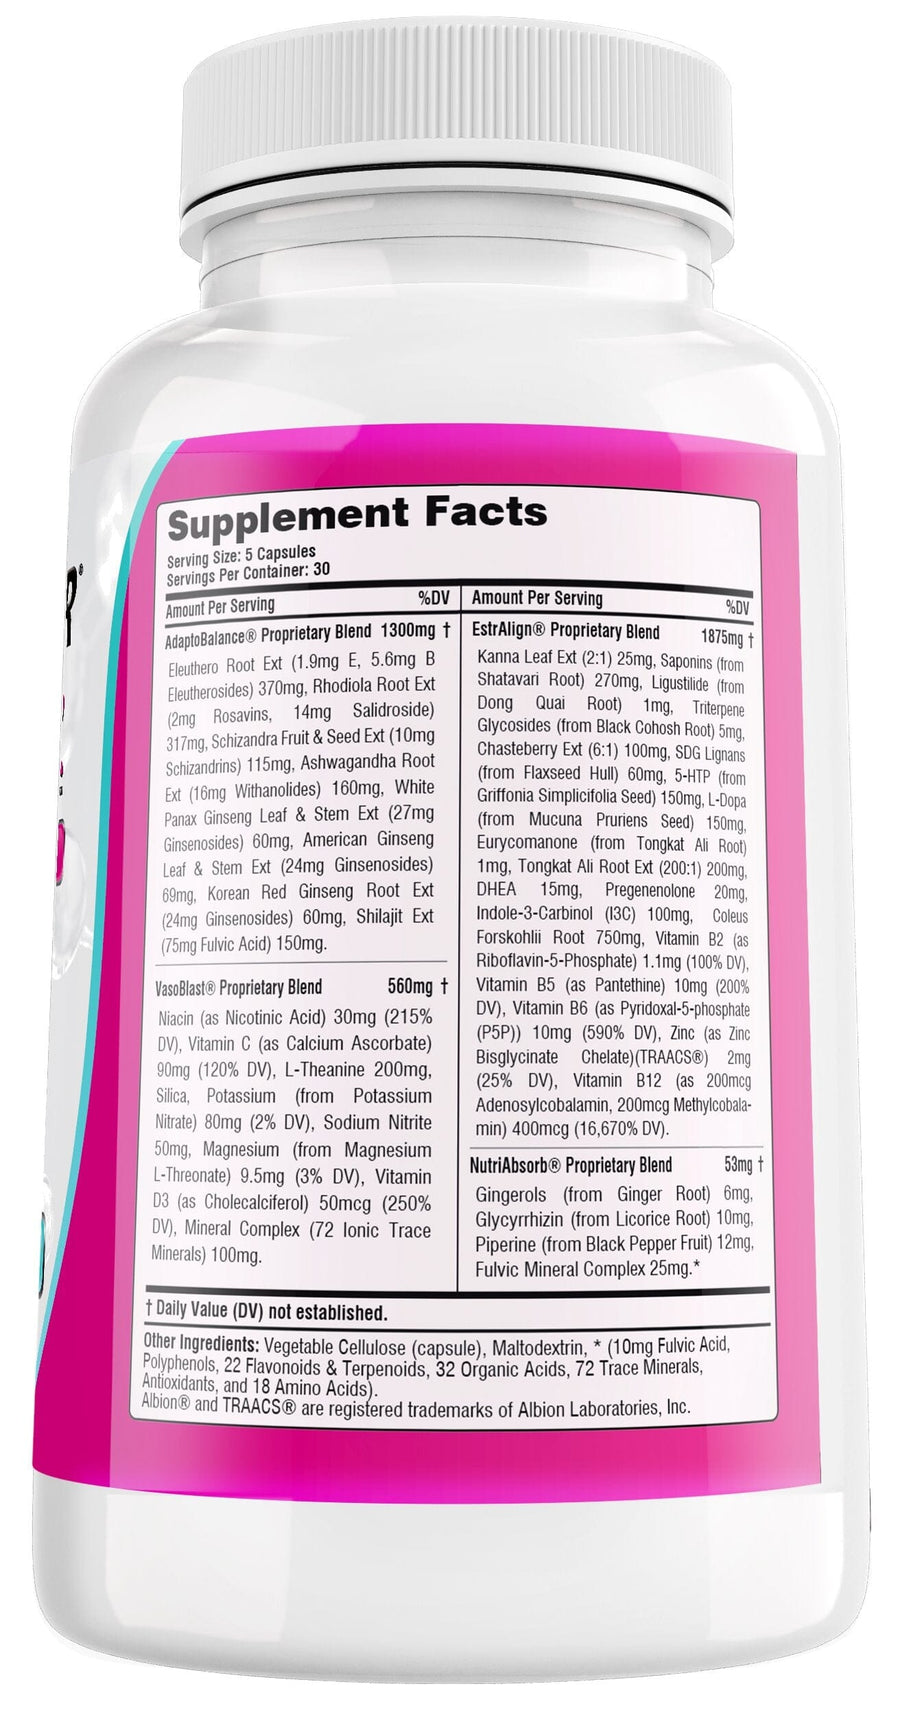 Photo of bottle of EmpowHER showing Supplement Facts panel - Ultimate Women's Health Formula Tonics Lean Factor - 150 capsules per bottle